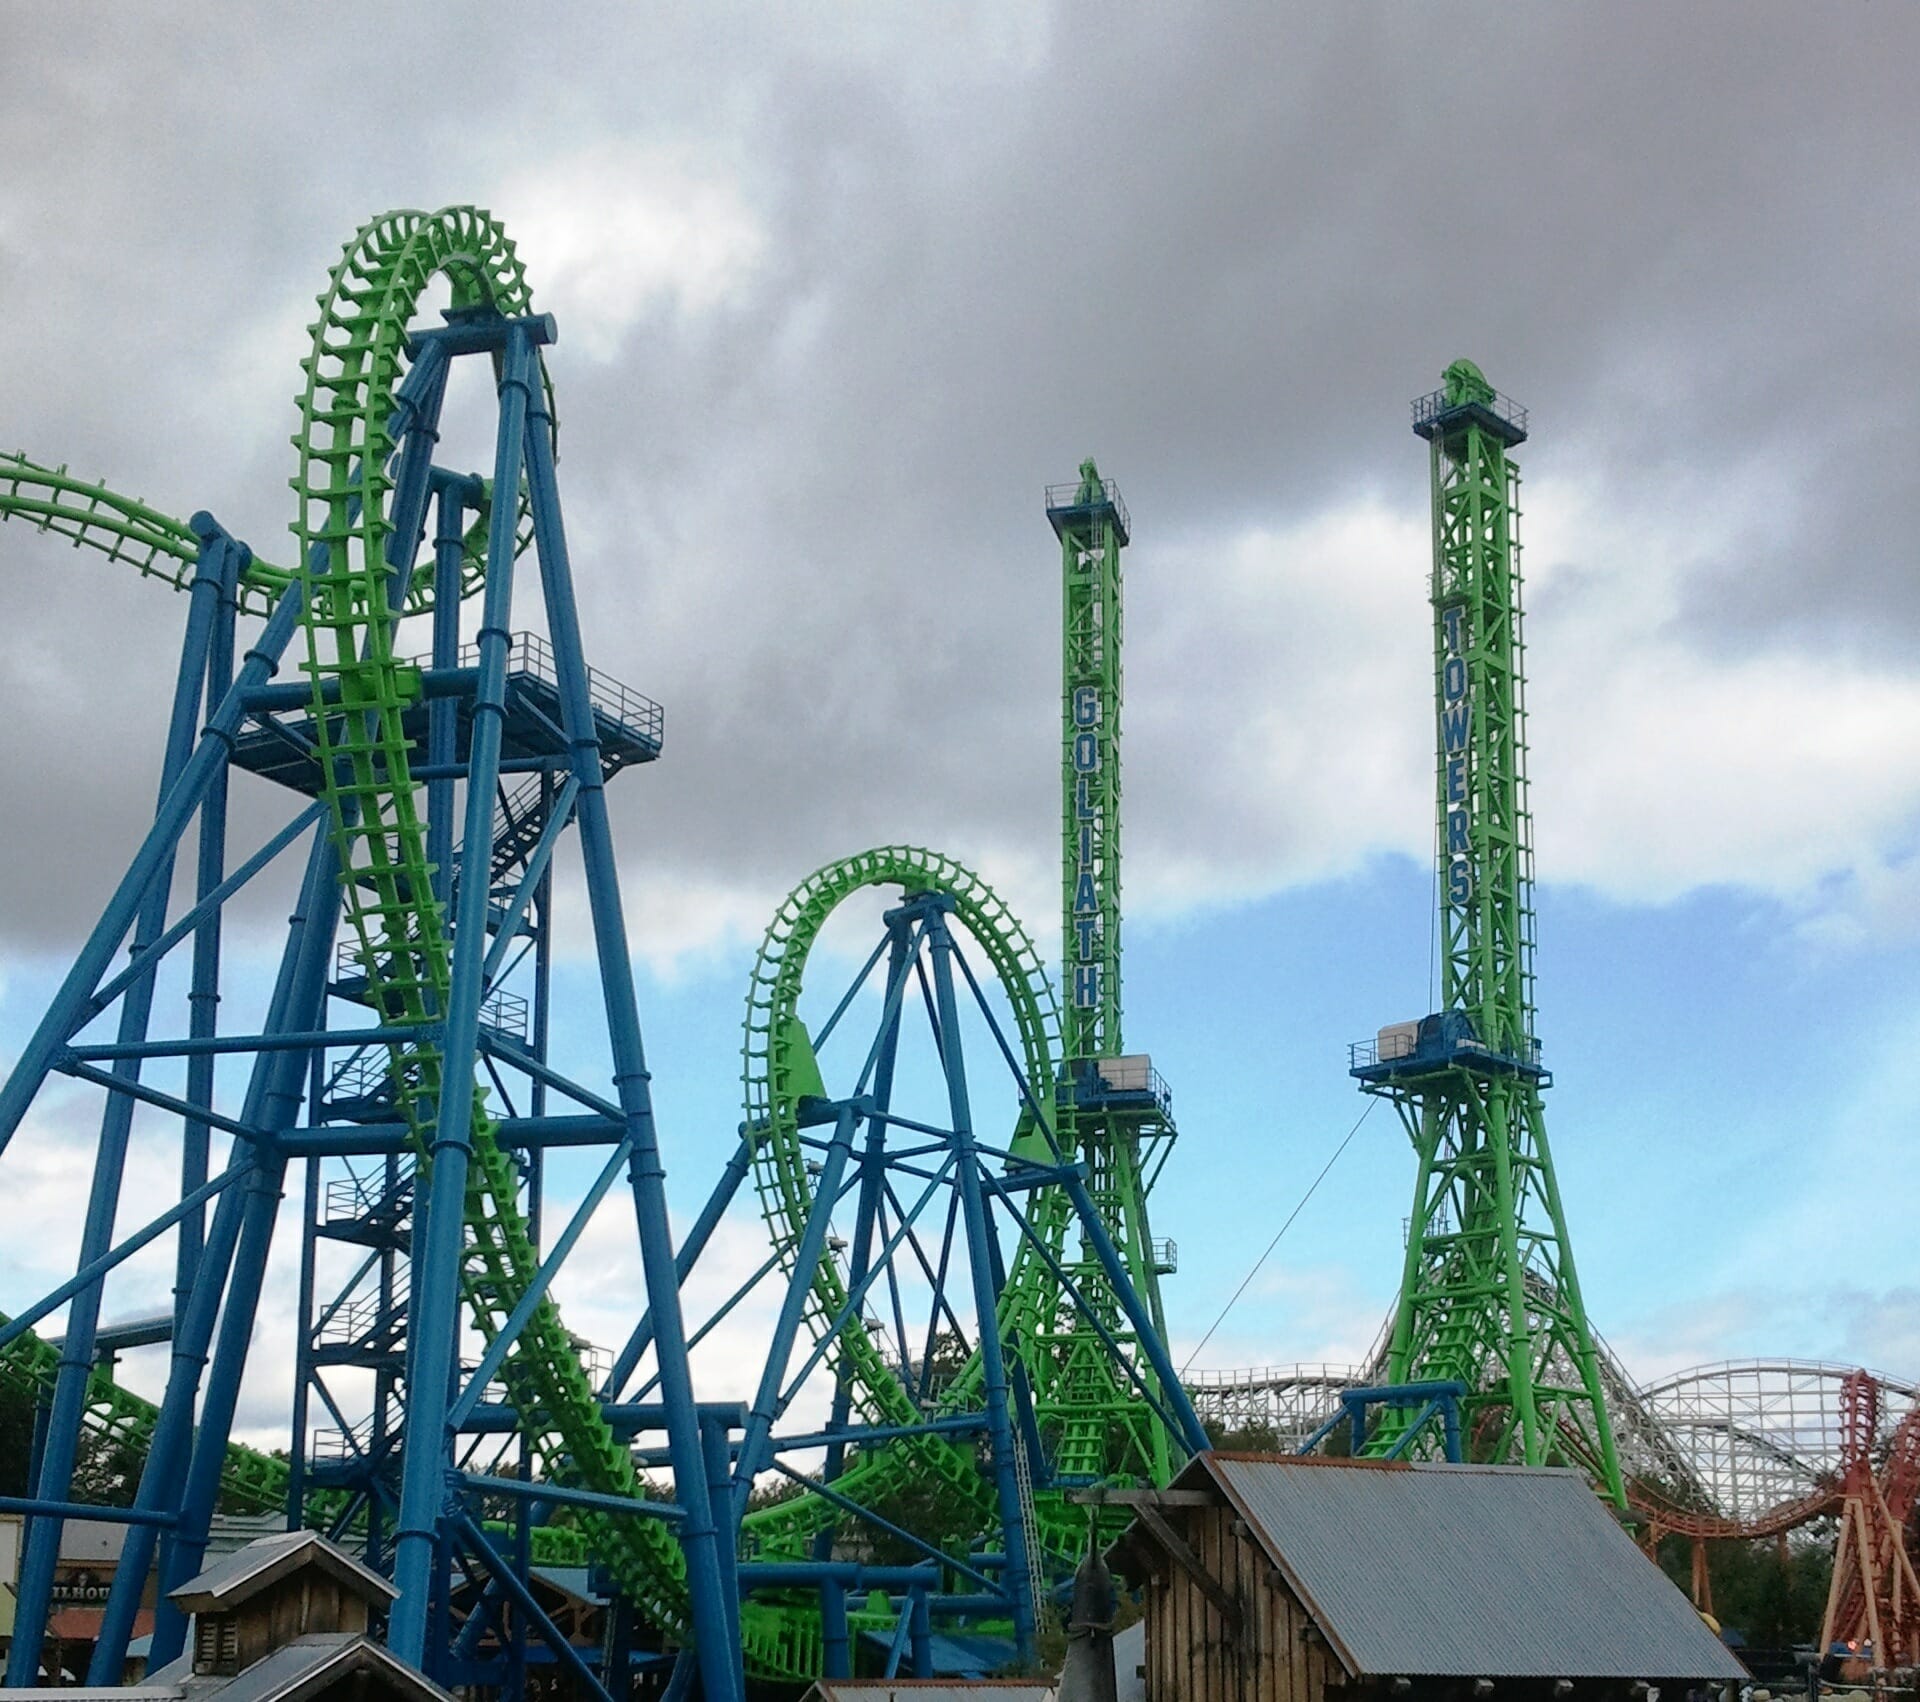 Goliath Towers Rollercoaster